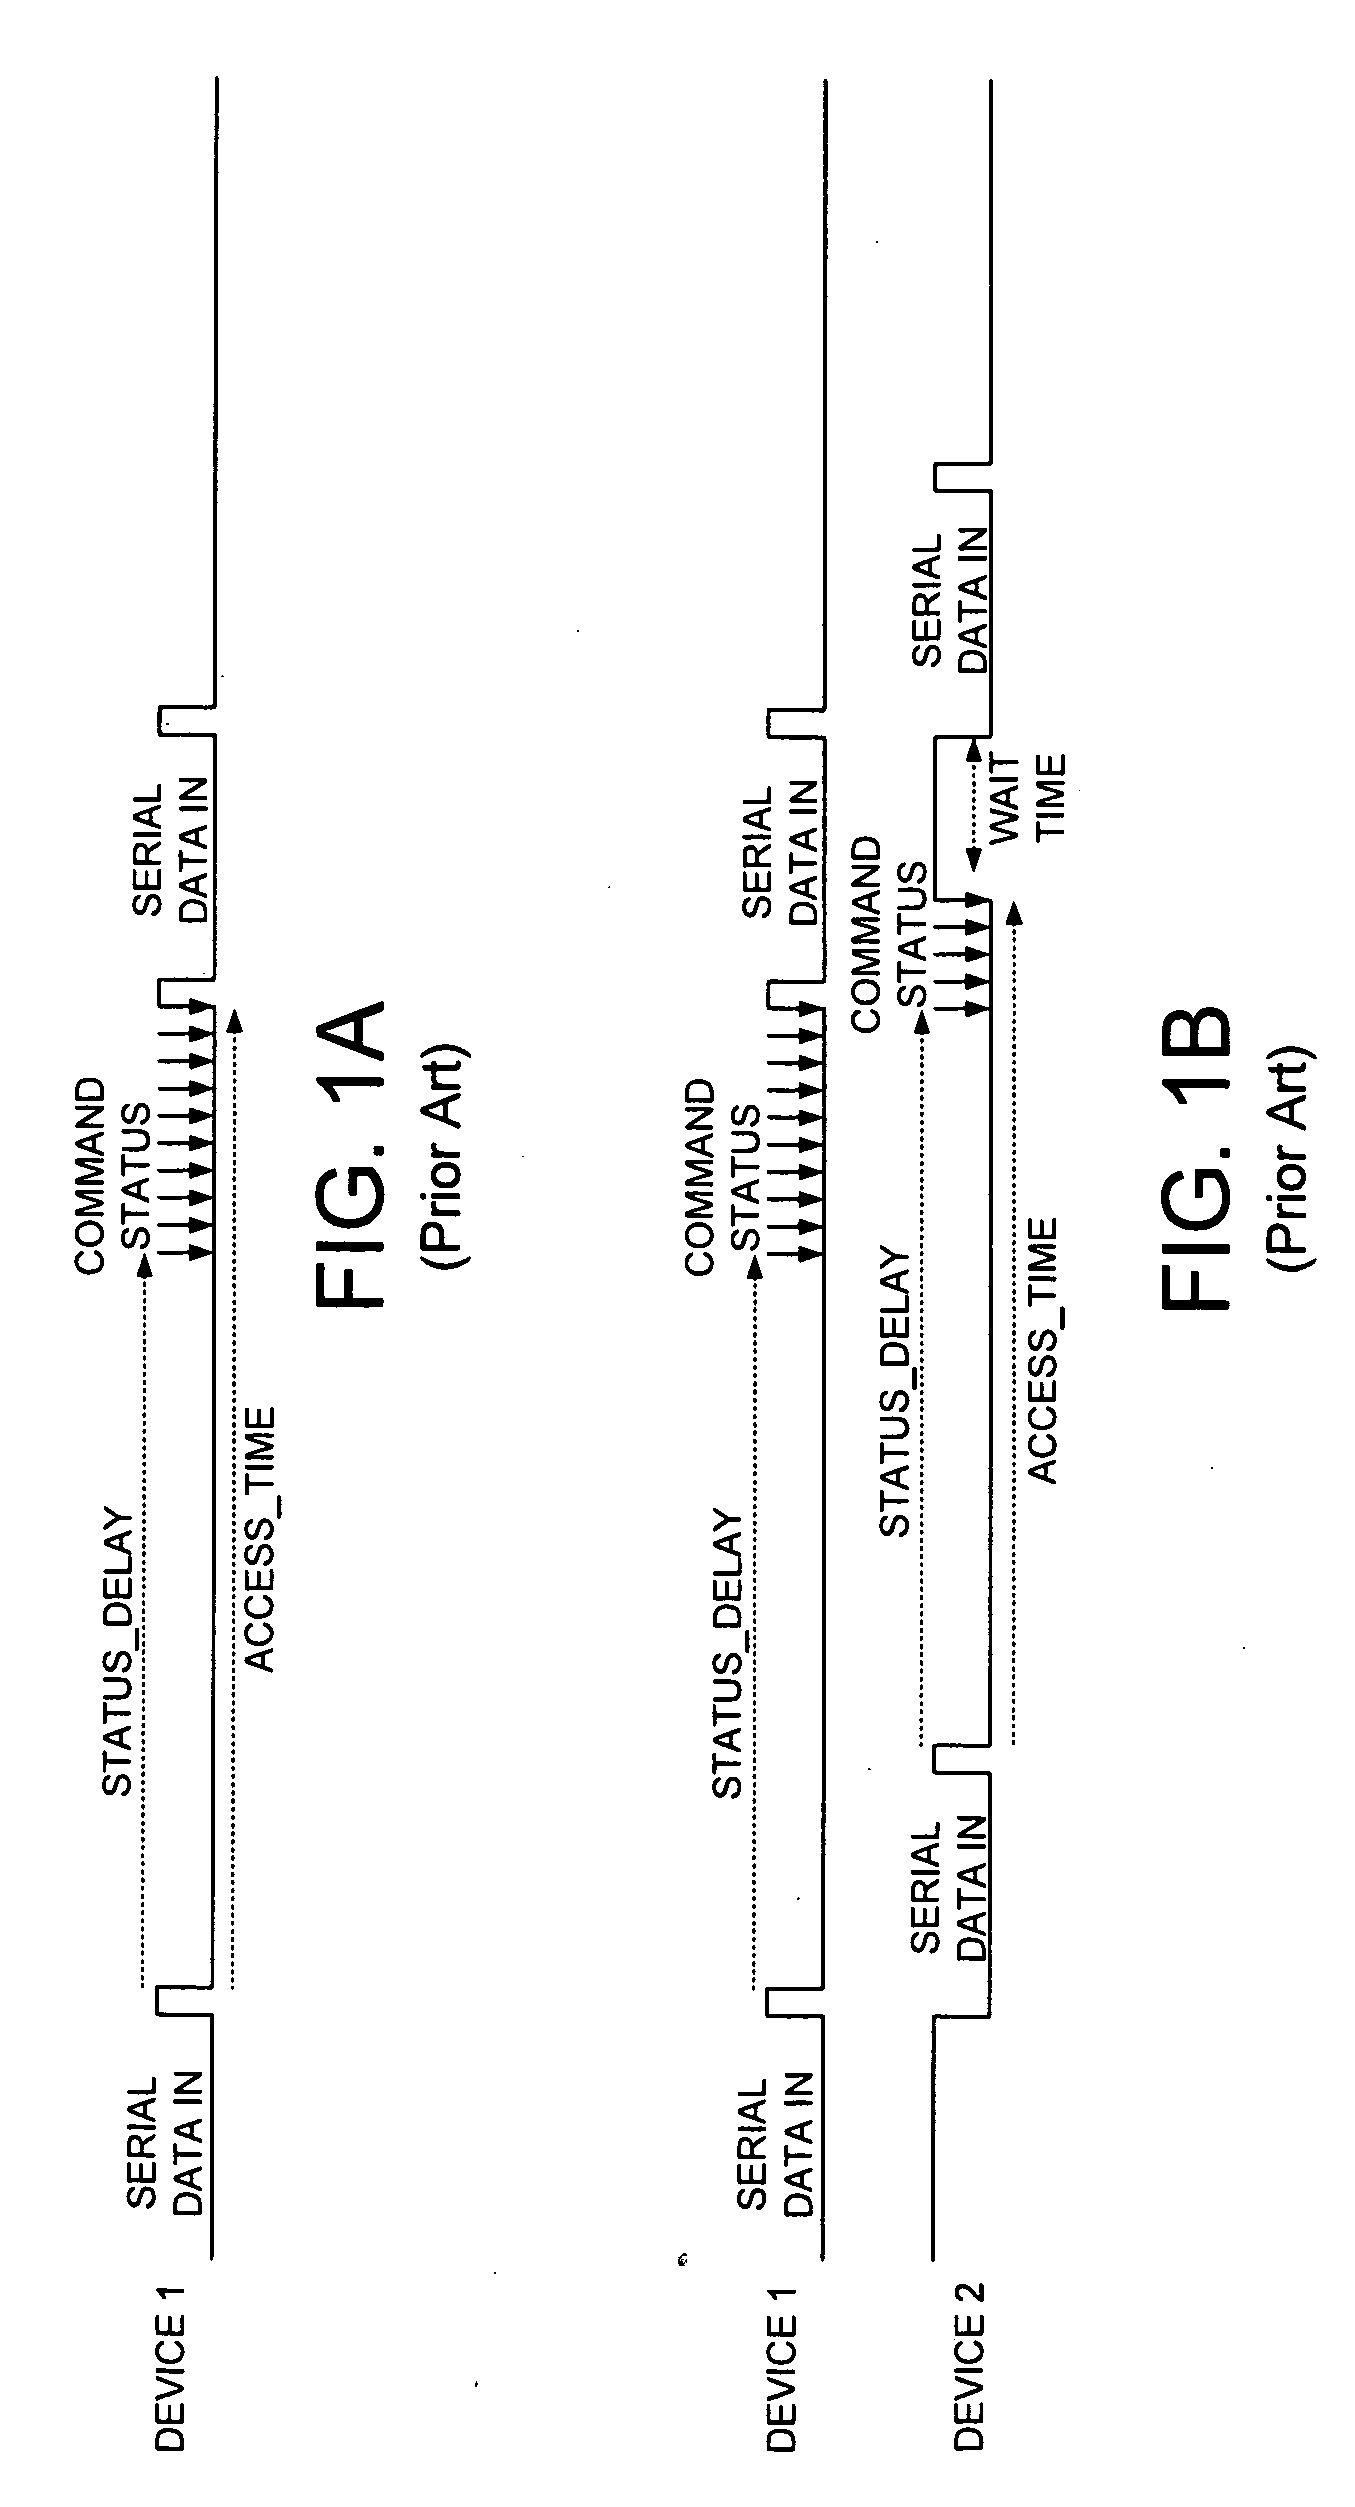 Adjusting access of non-volatile semiconductor memory based on access time